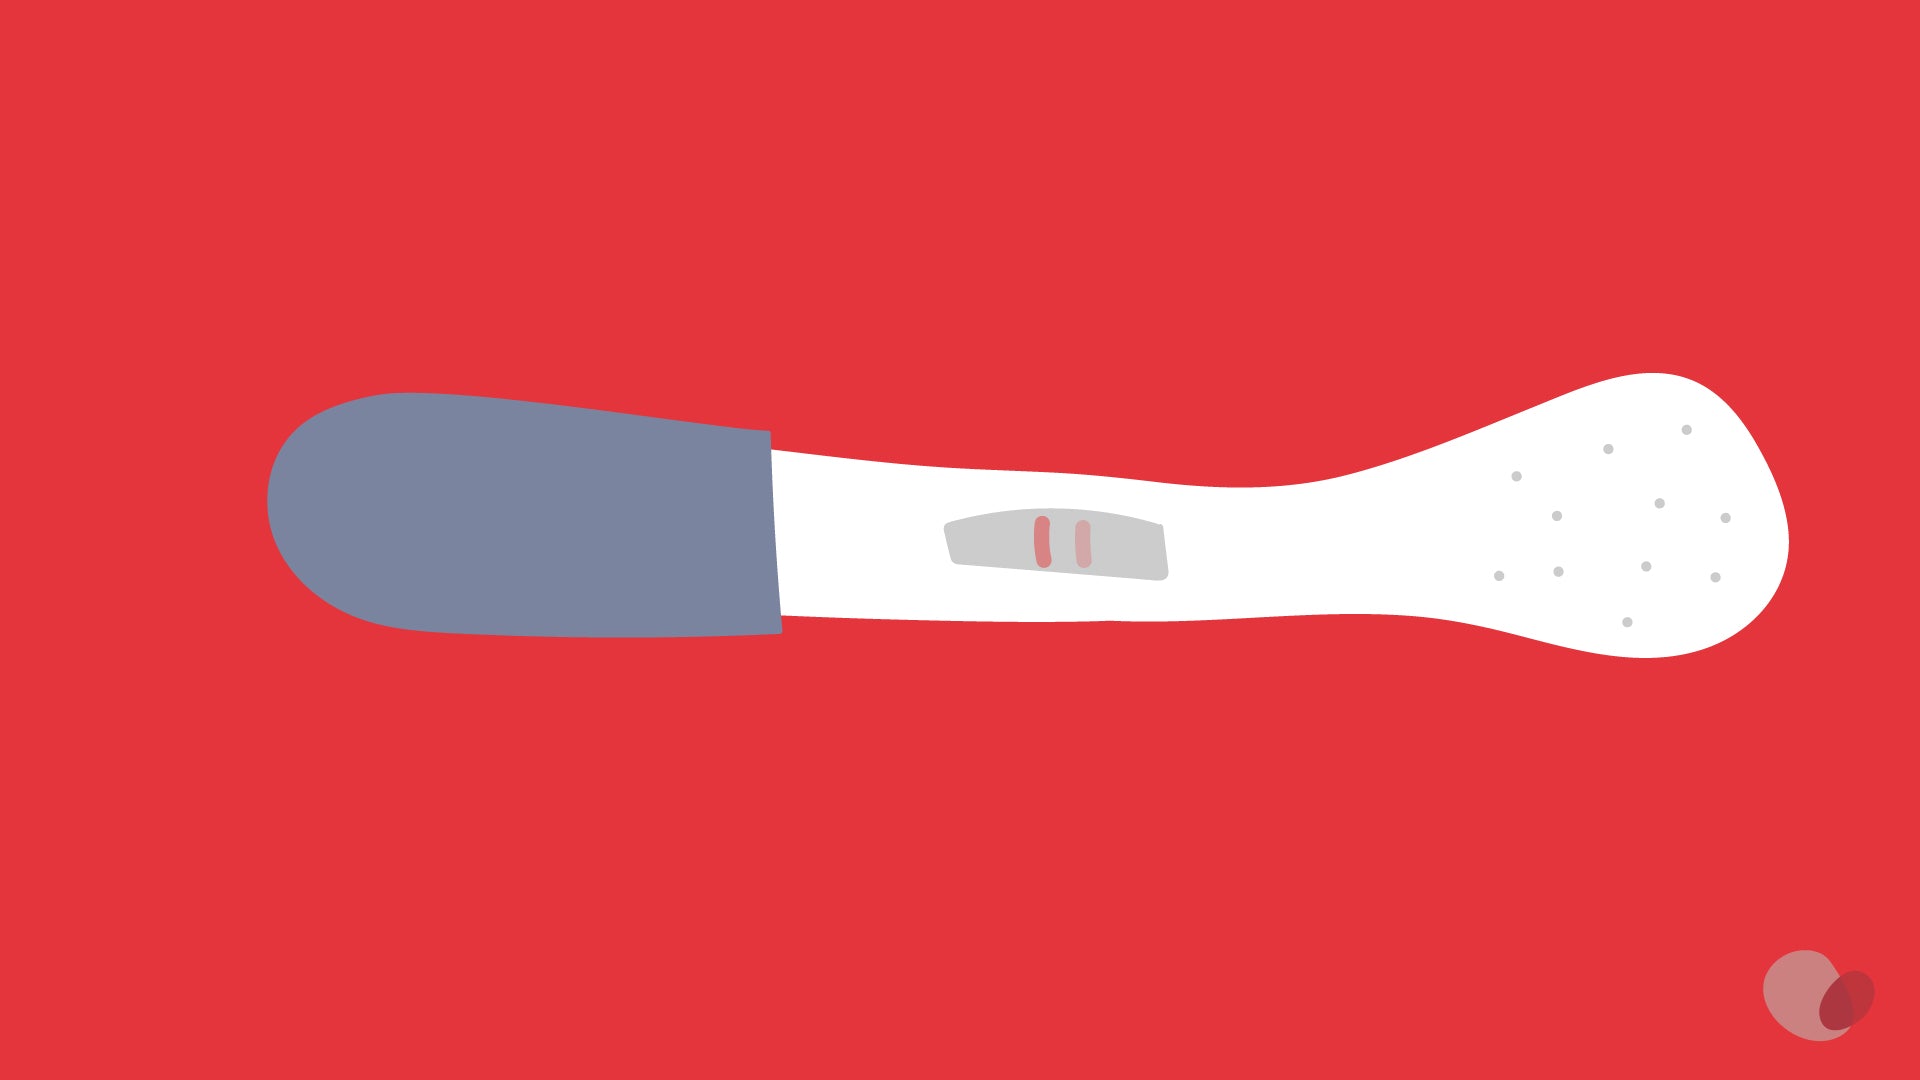 twoplus Pregnancy Test Kit: How It Works, Accuracy And More